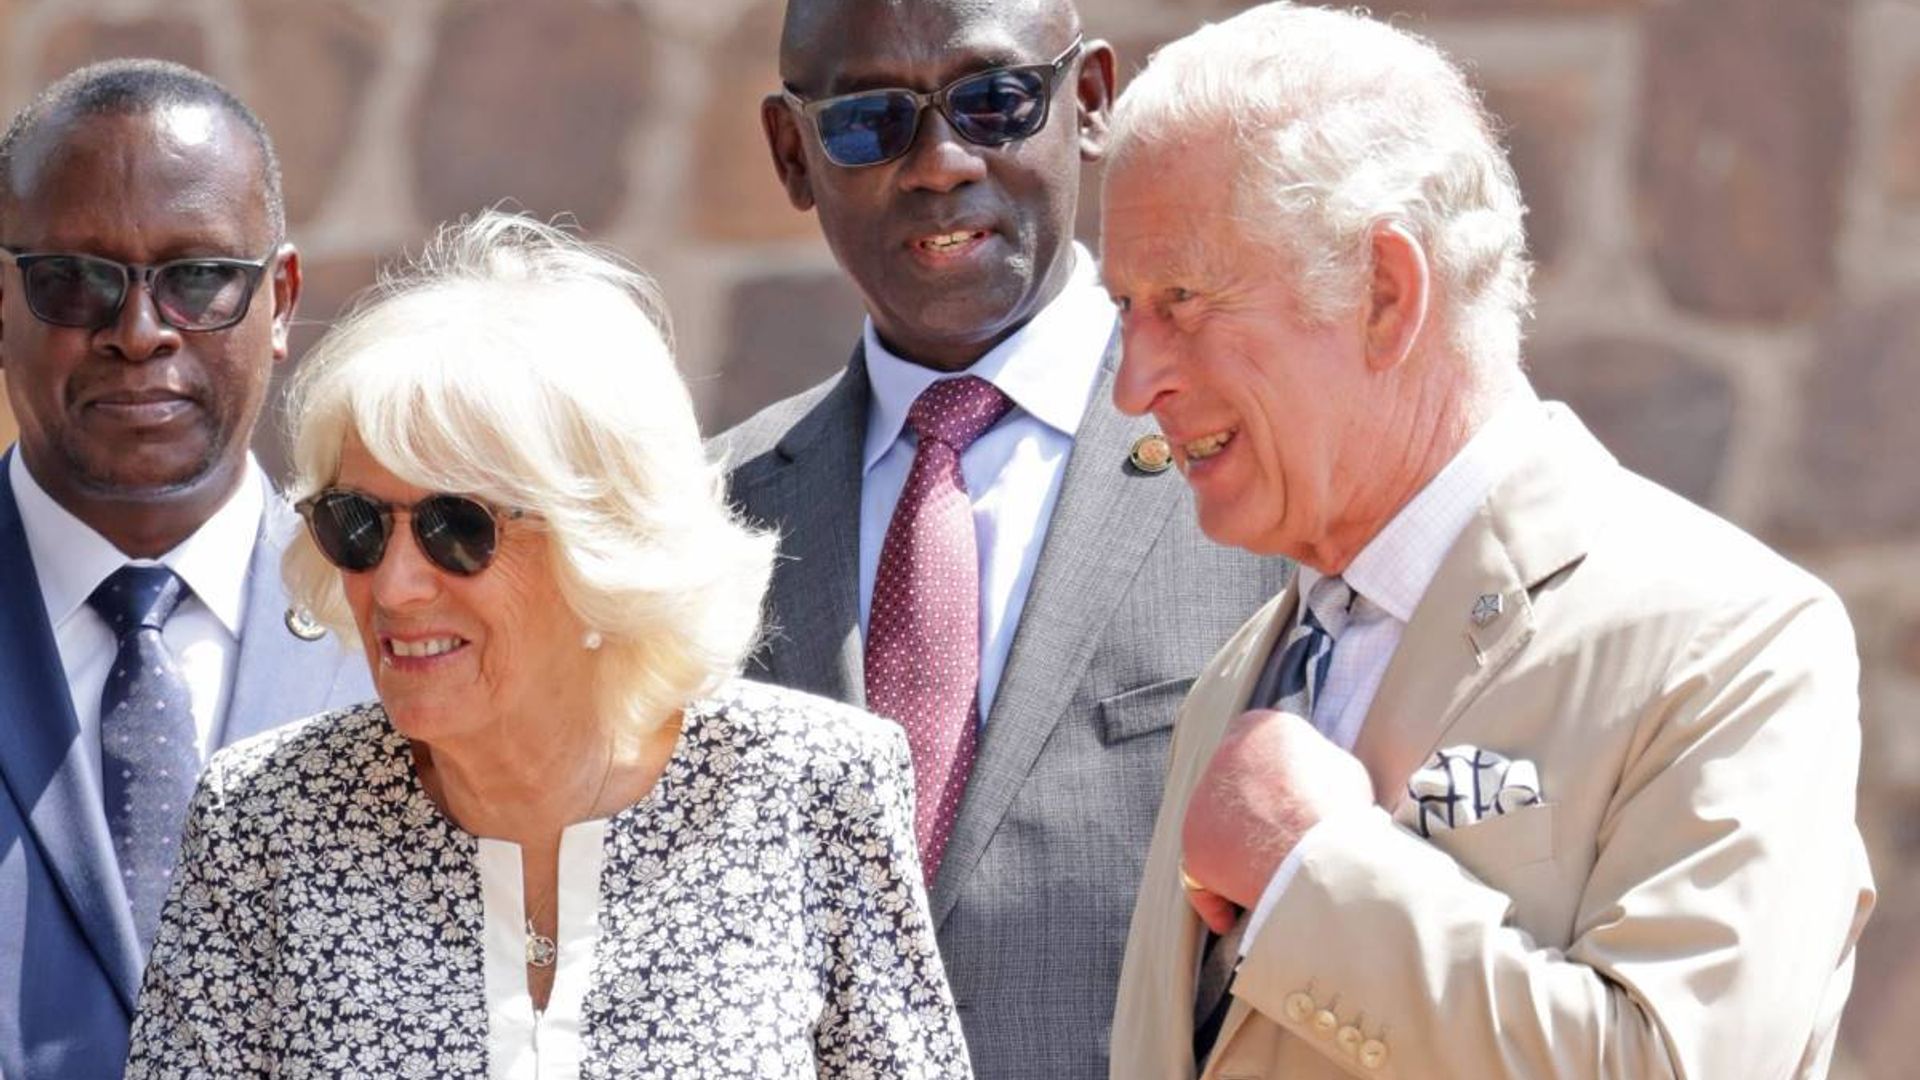 Prince Charles shows his sense of humour during visit to agroforestry site in Rwanda